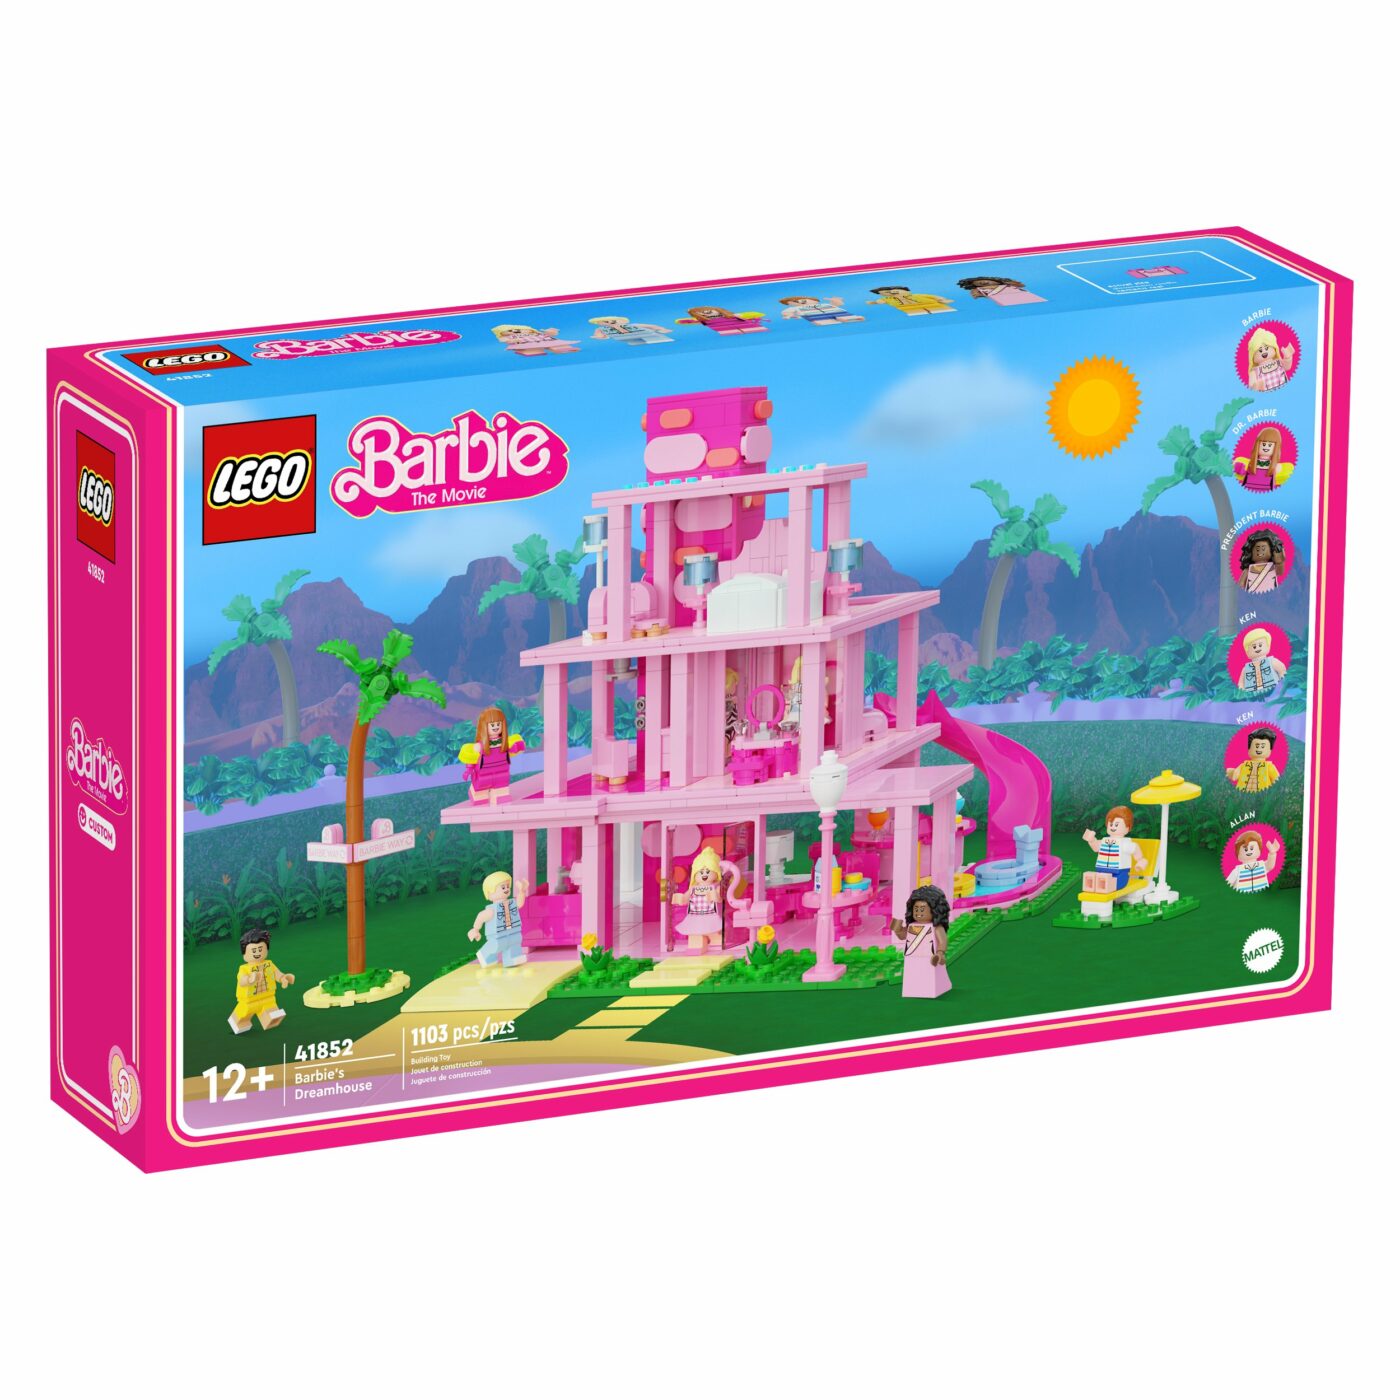 Here’s what a LEGO Barbie Movie theme could look like5